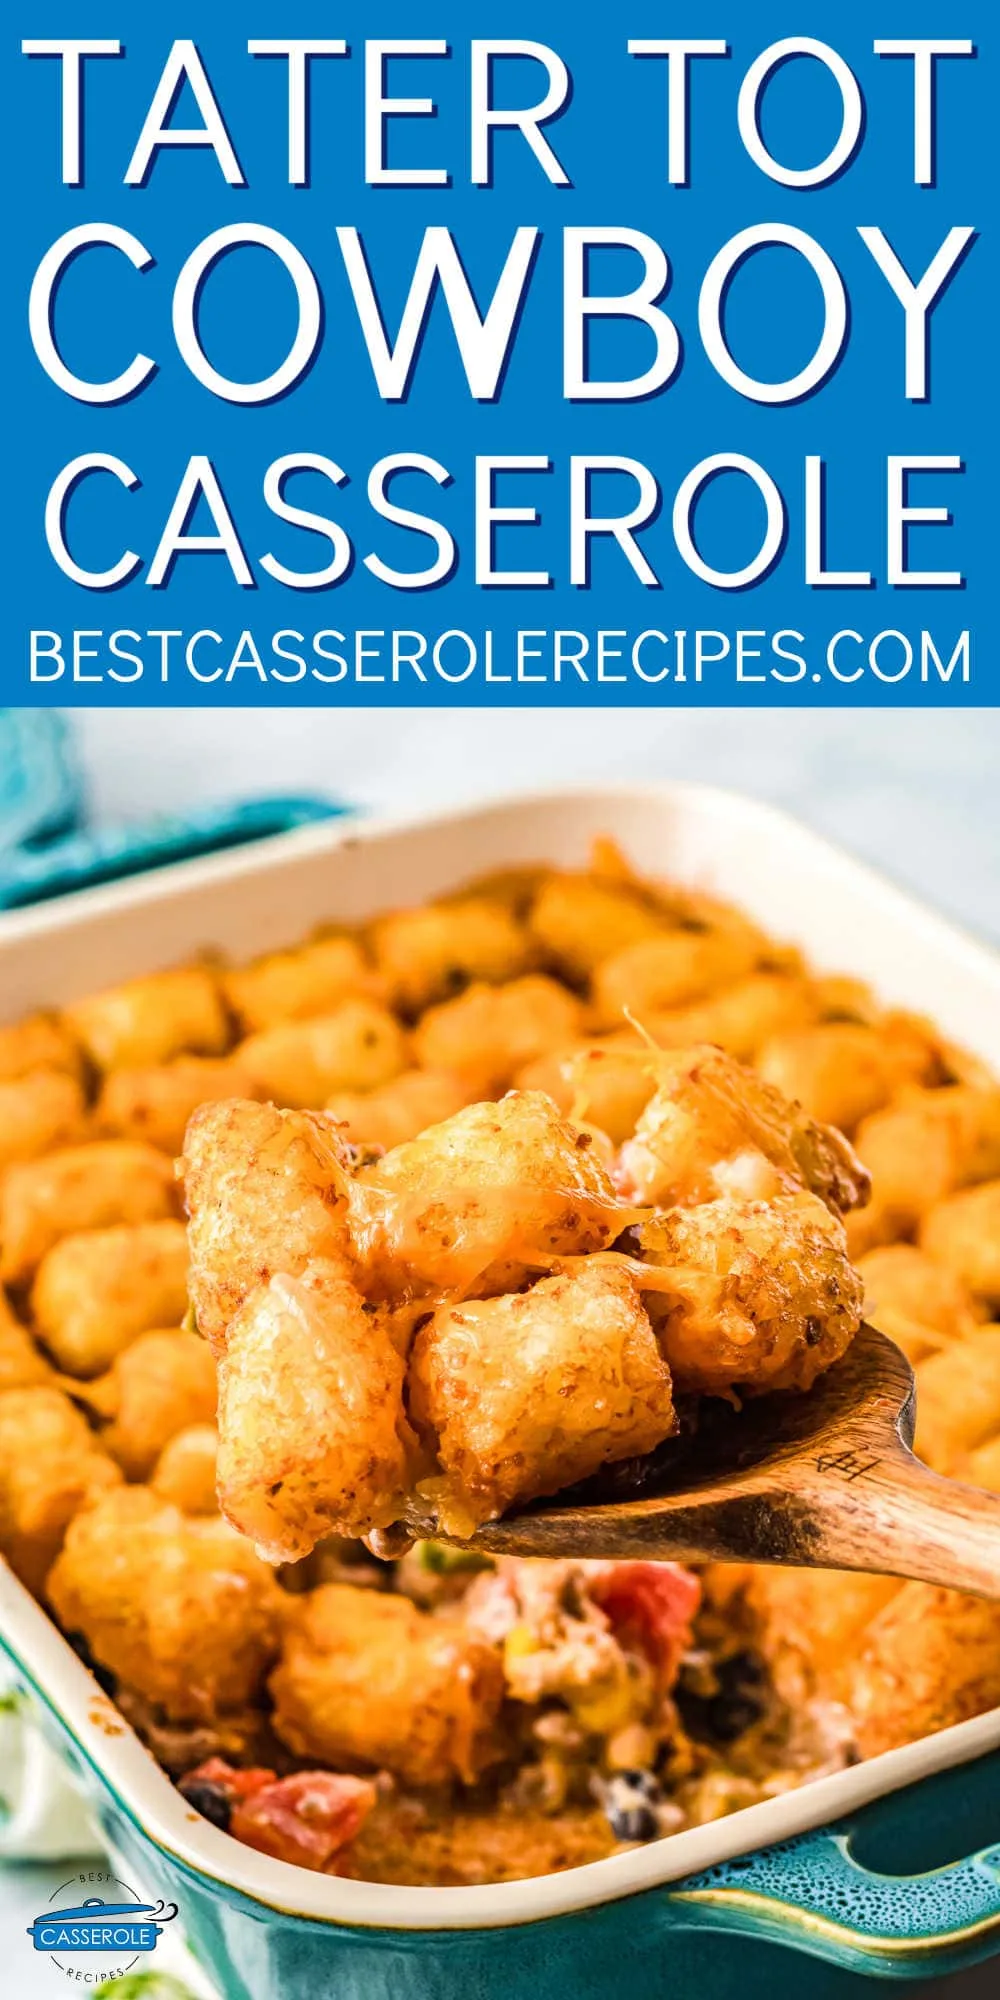 casserole with text "tater tot cowboy"